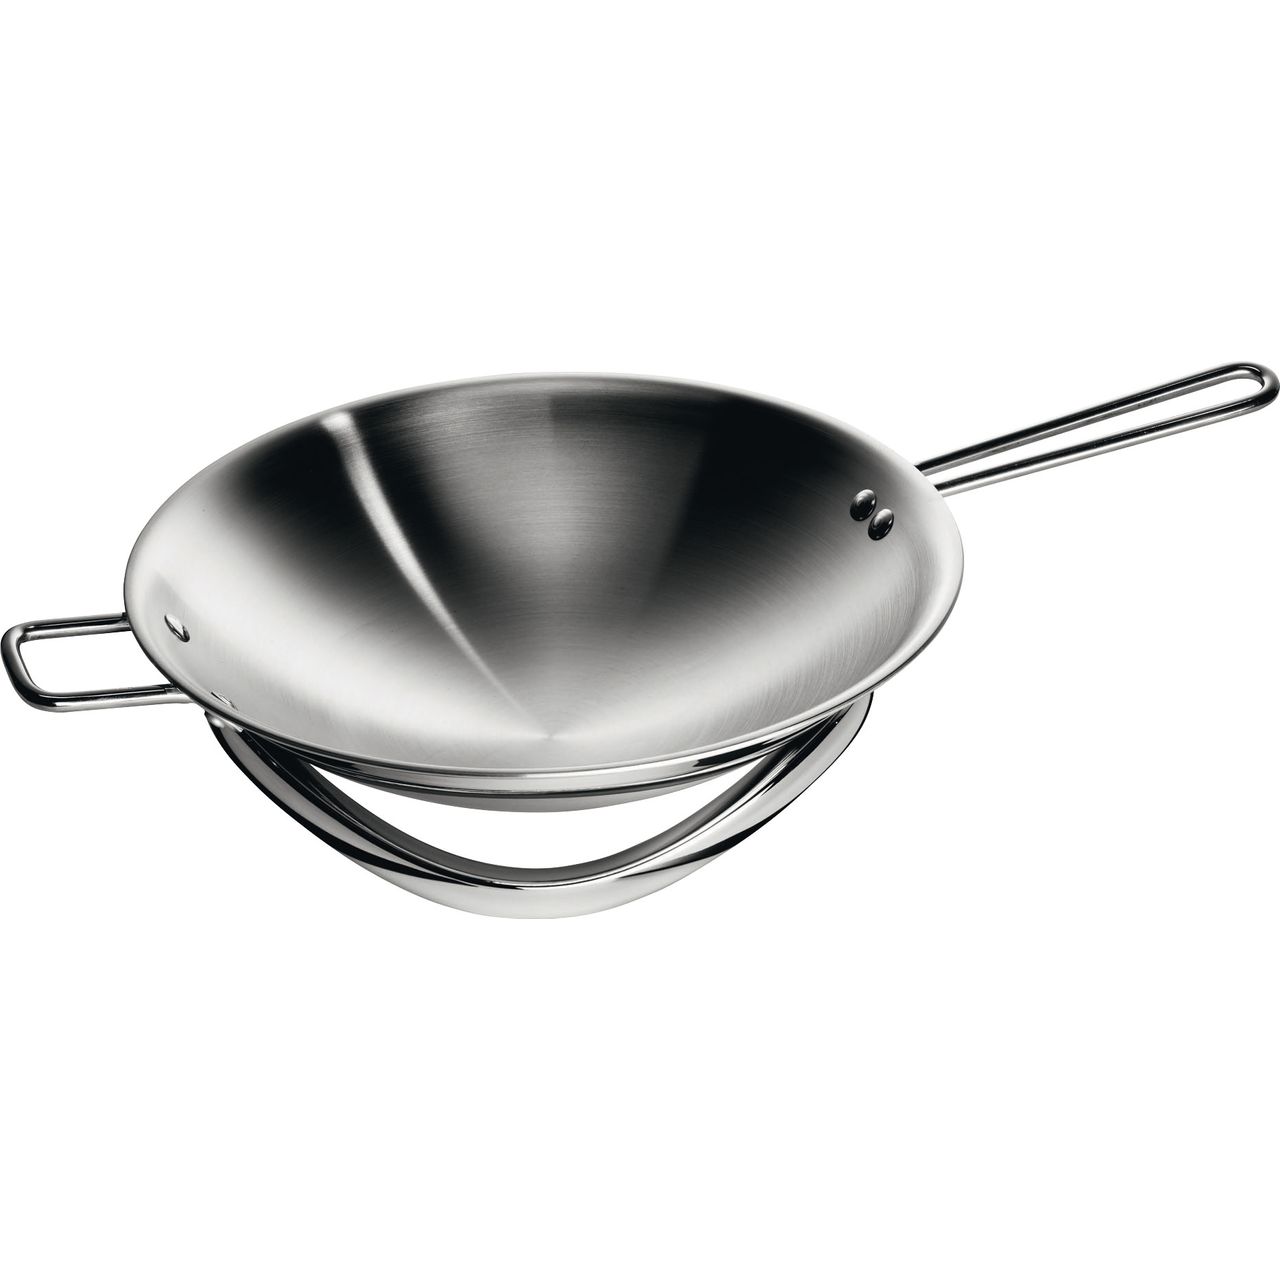 AEG FUSION-WOK Fusion Wok With Support Ring Review